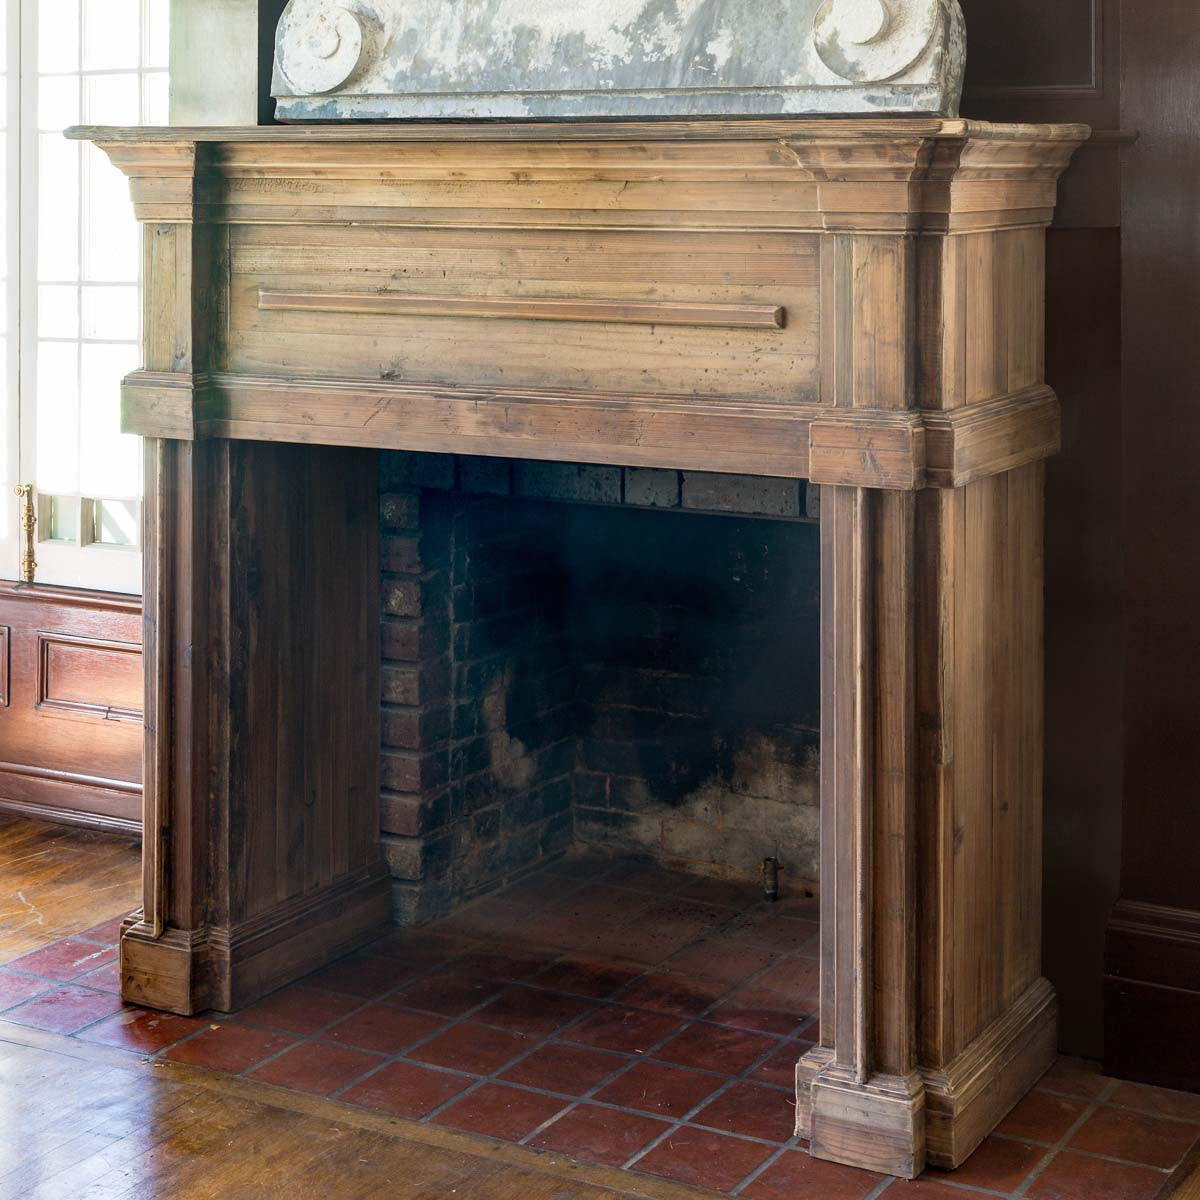 Wooden Pine Fireplace Mantel for sale, Reclaimed Pine Wood Fireplace Mantel